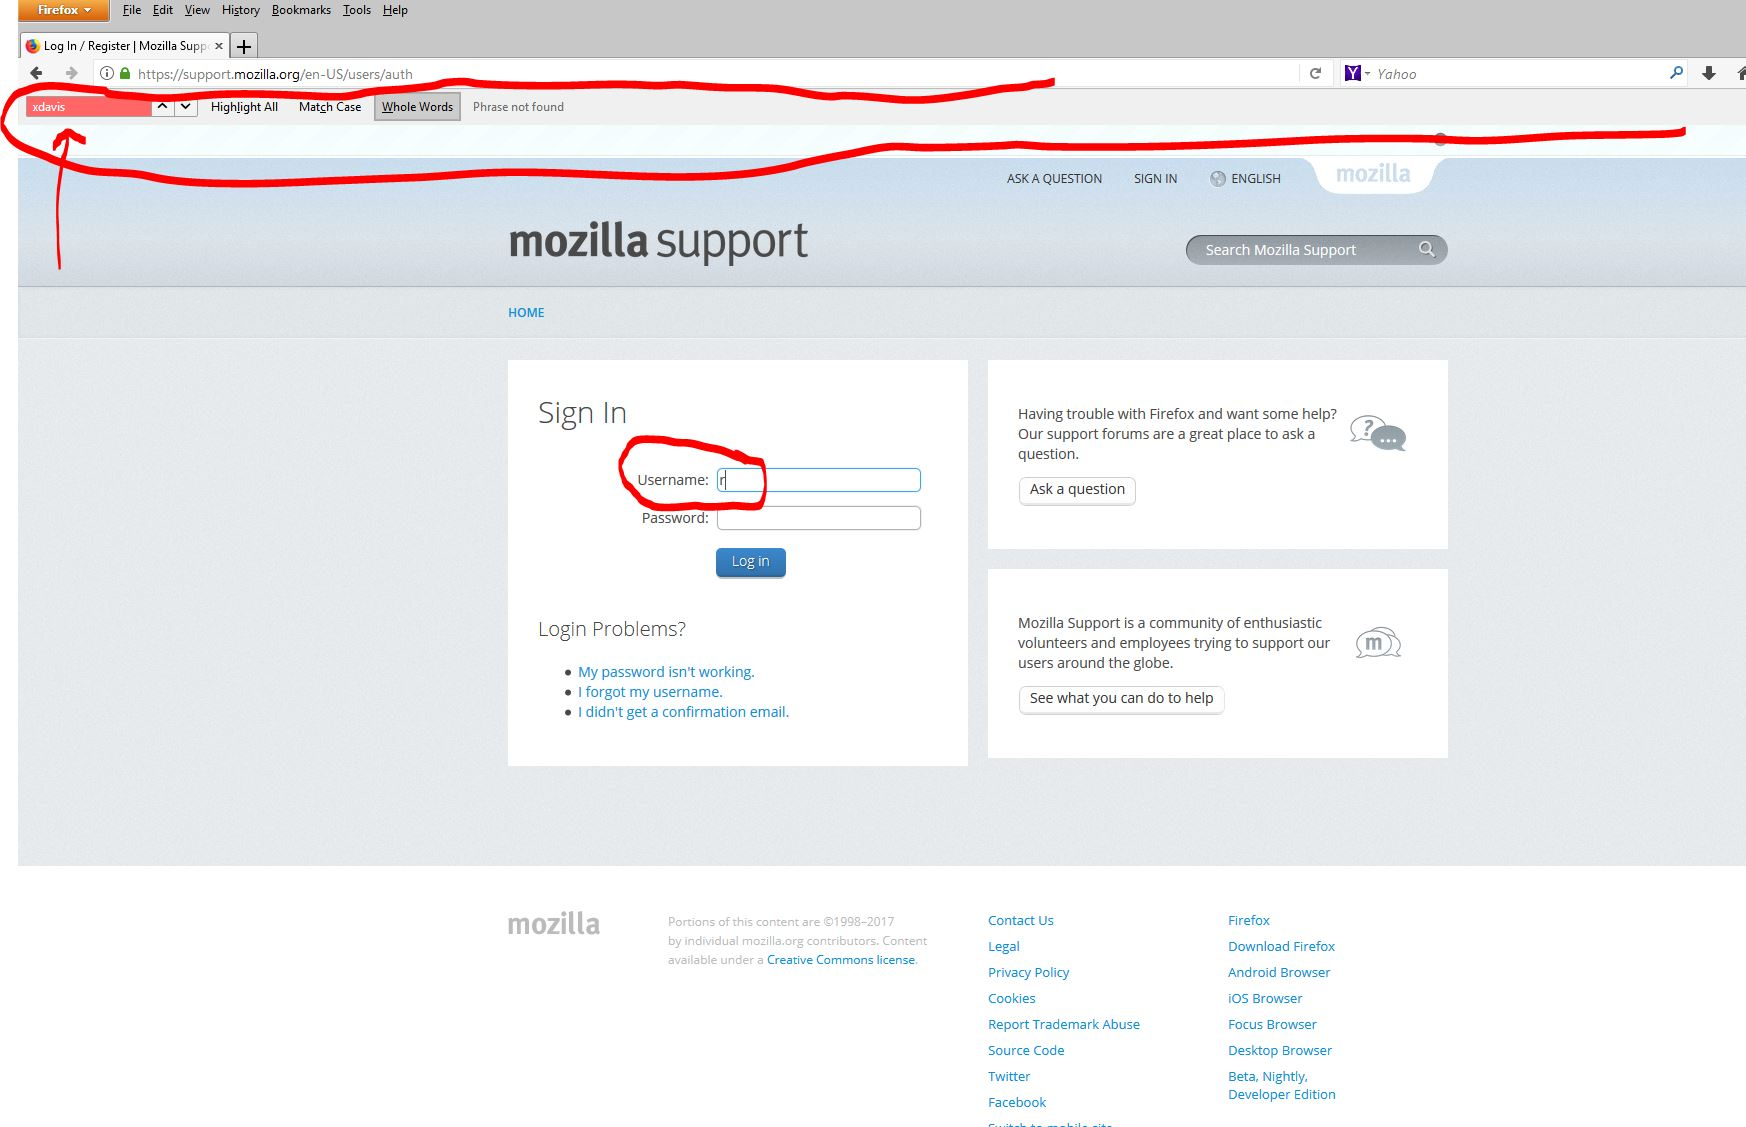 I hate the new FIND bar popping up when I type a letter into the URL bar.  How can I disable this? | Firefox Support Forum | Mozilla Support